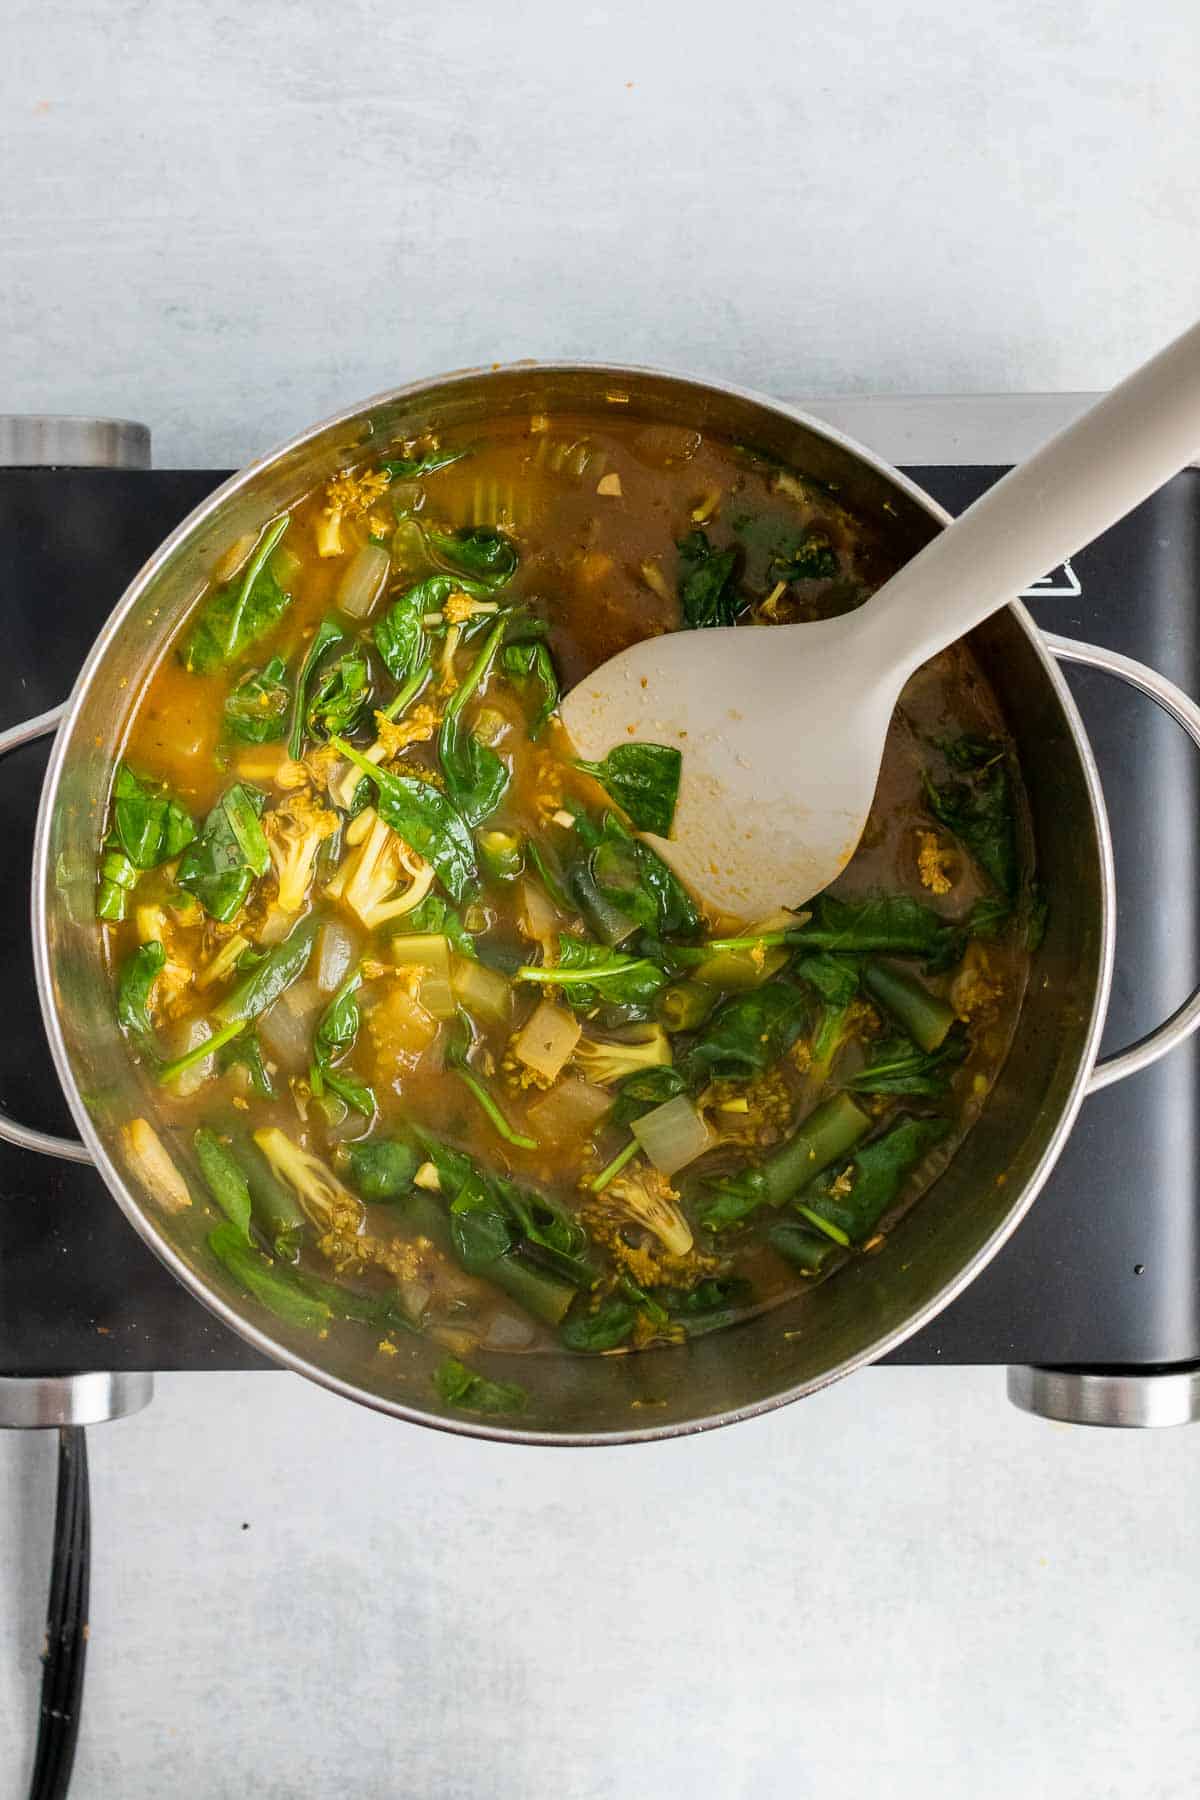 A white spoon stirring the spinach into the soup in the saucepan, as seen from above